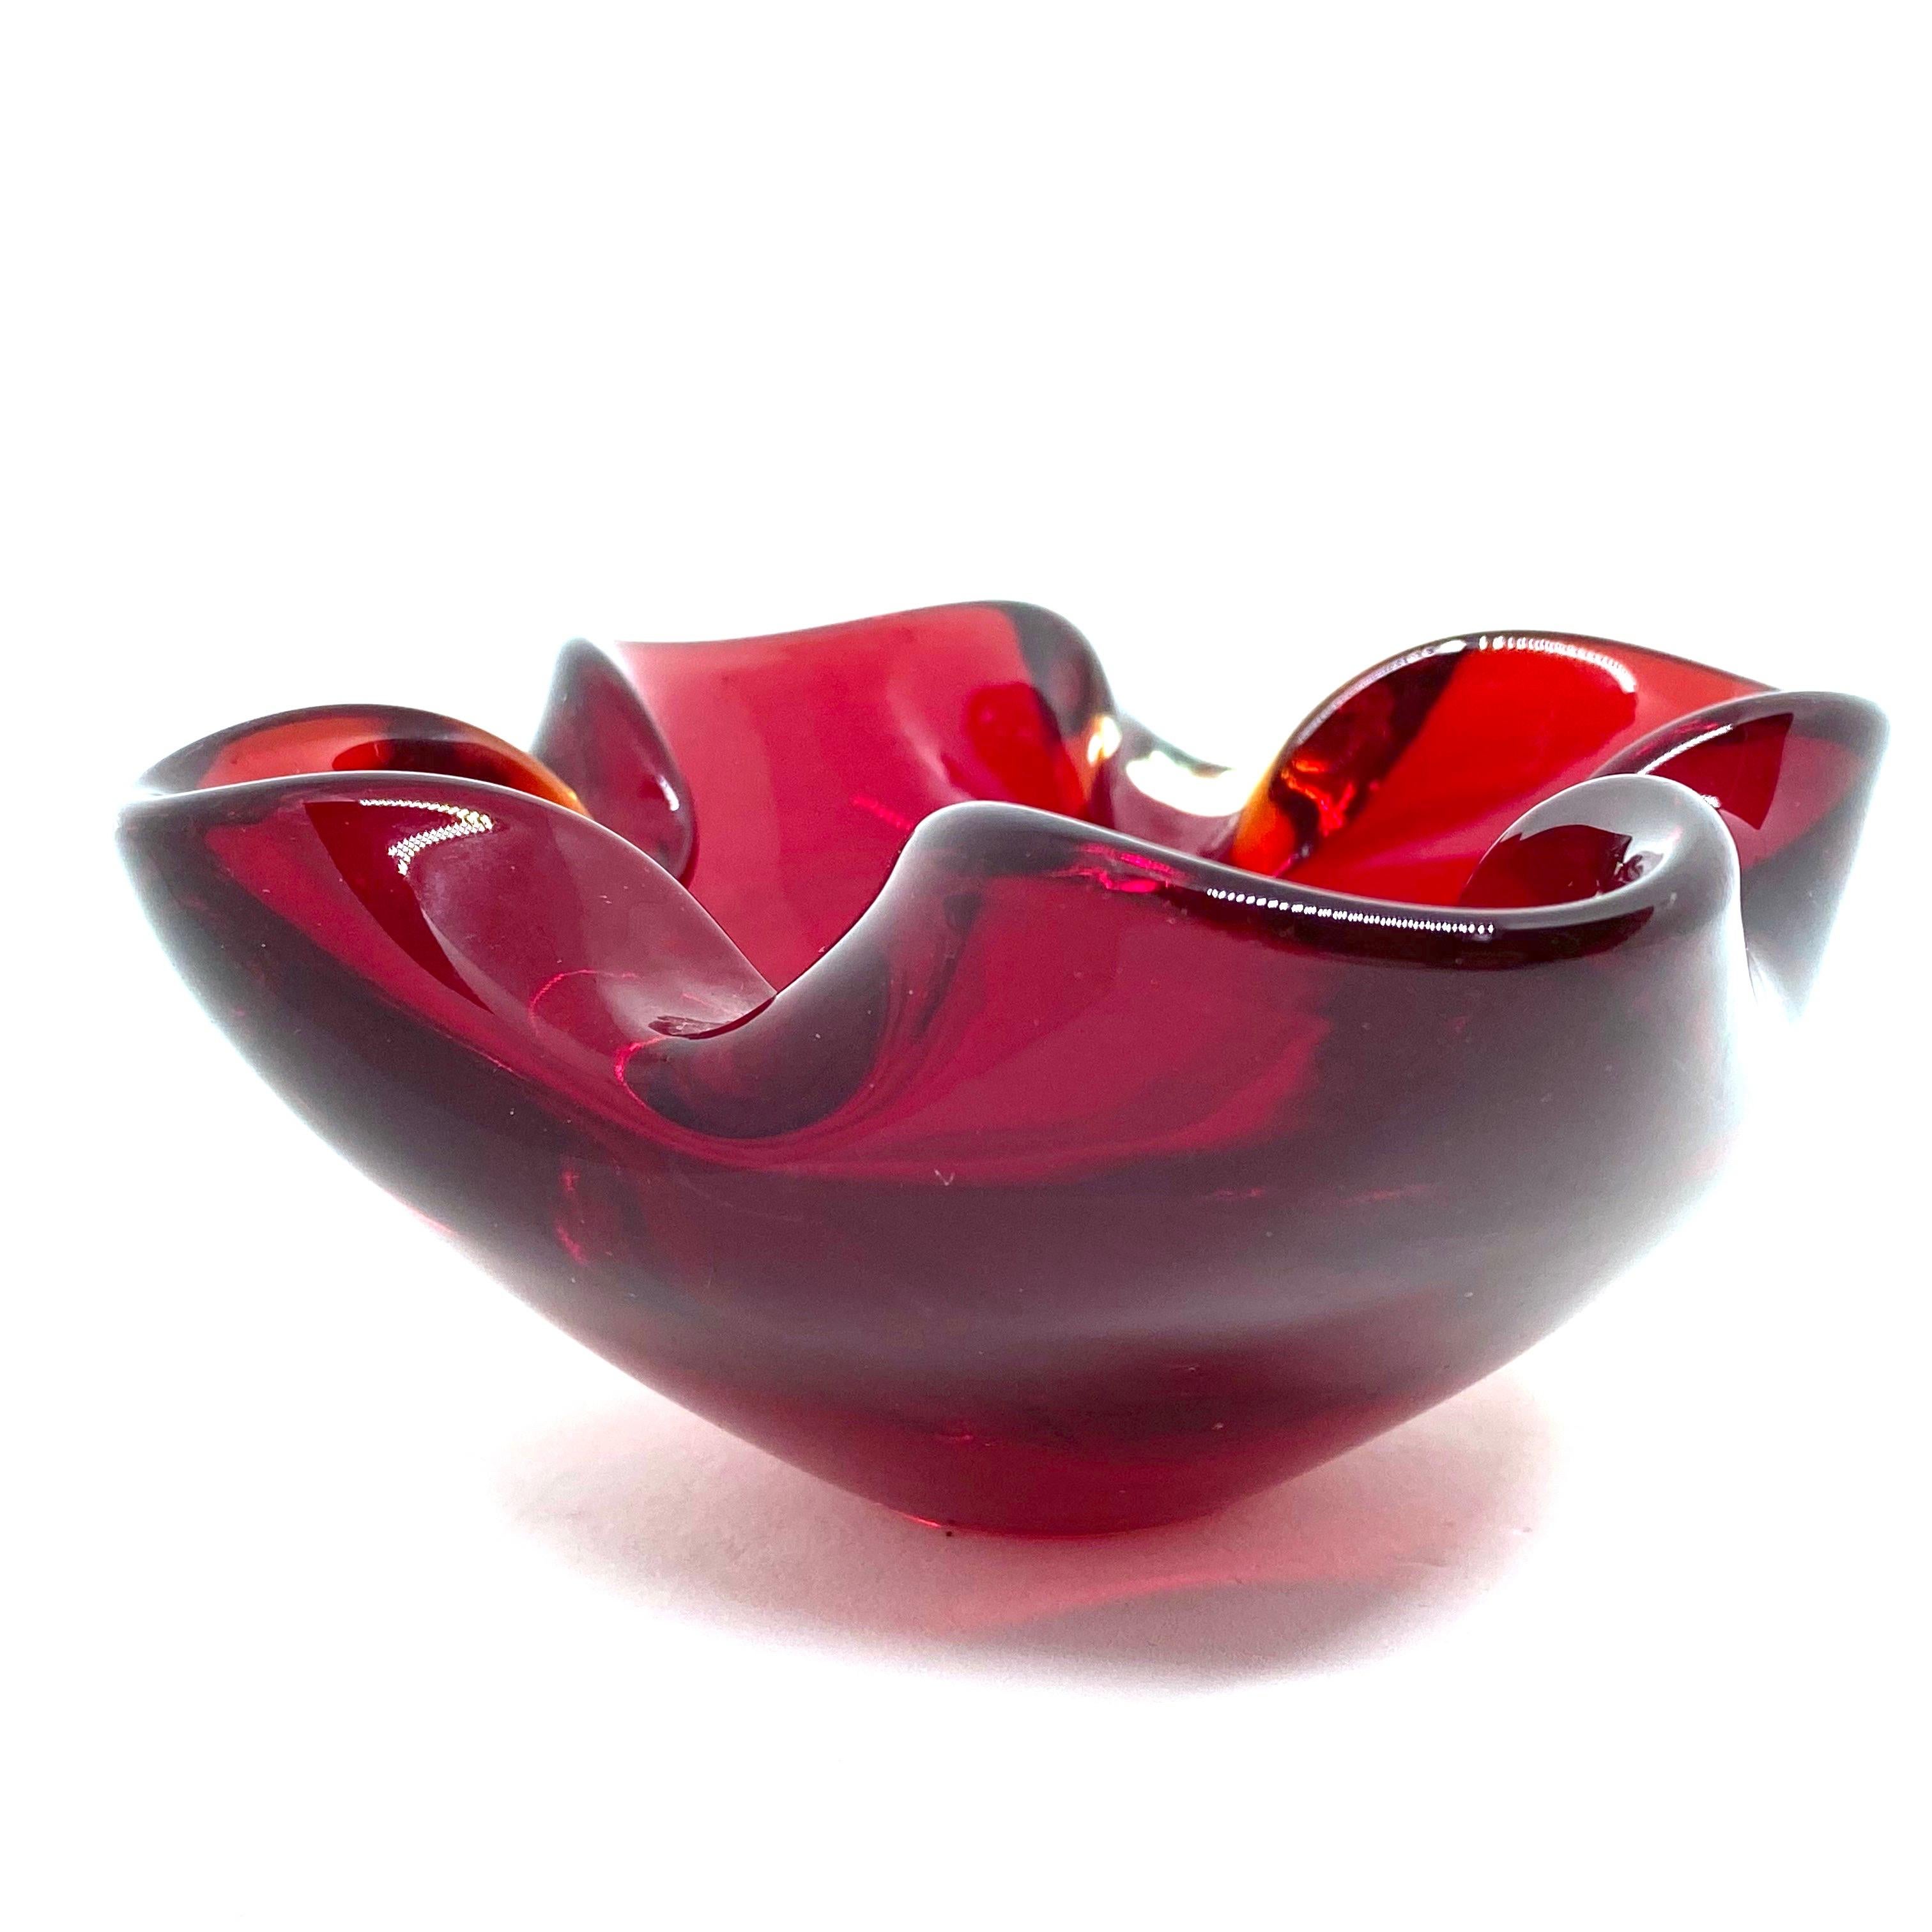 Organic Modern Petite Murano Sommerso Ruby Red Glass Bowl Catchall, Vintage, Italy, 1970s